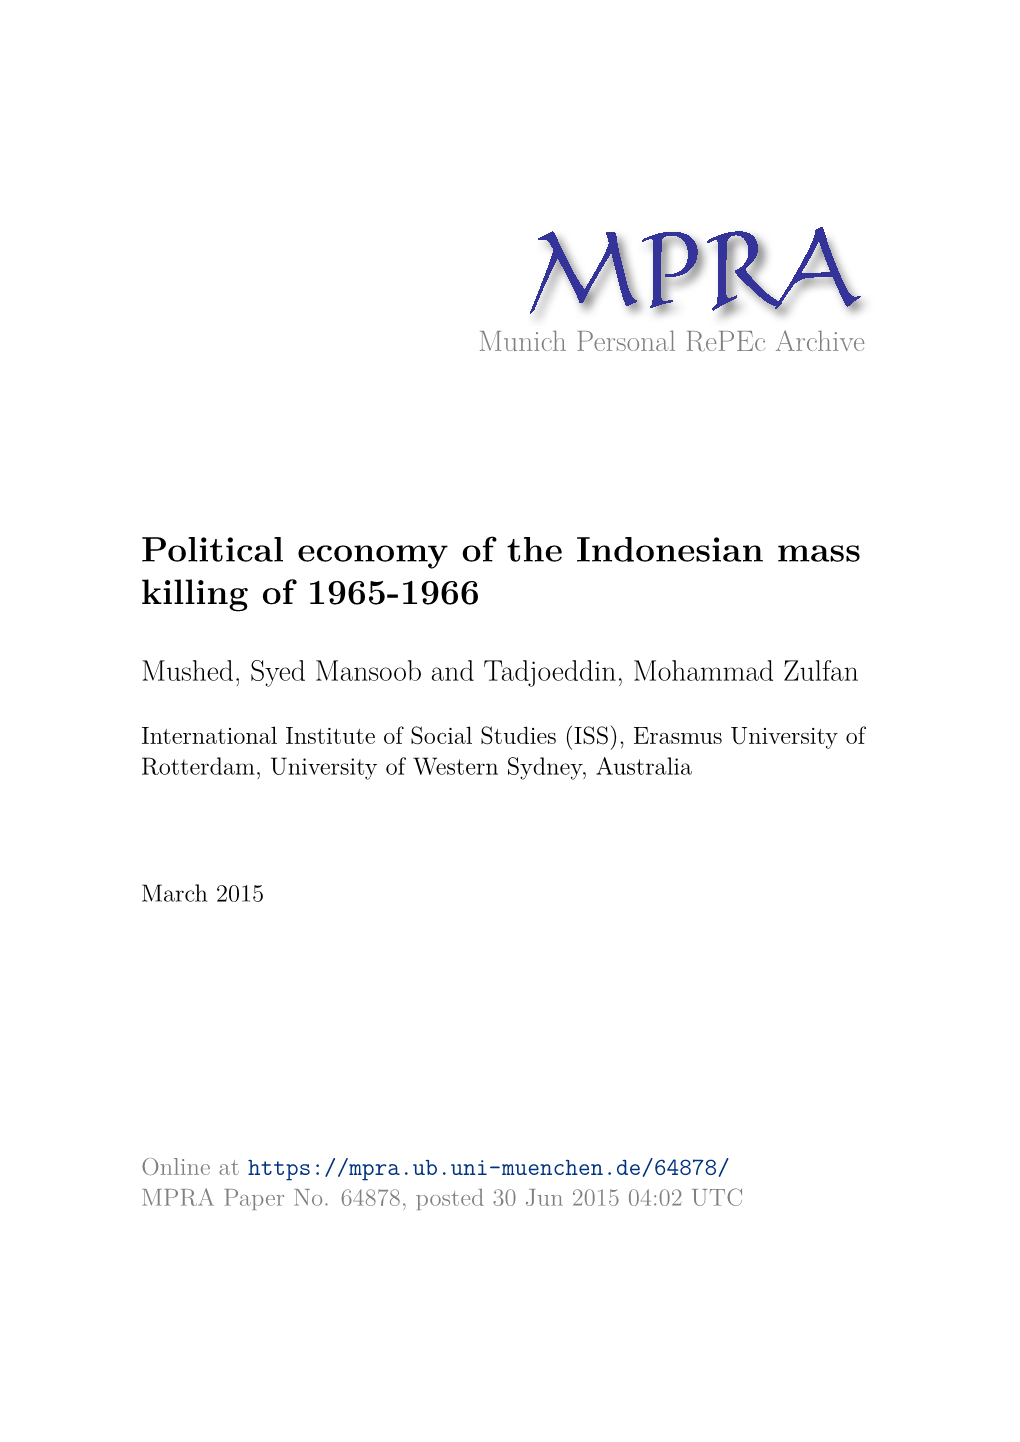 Political Economy of the Indonesian Mass Killing of 1965-1966